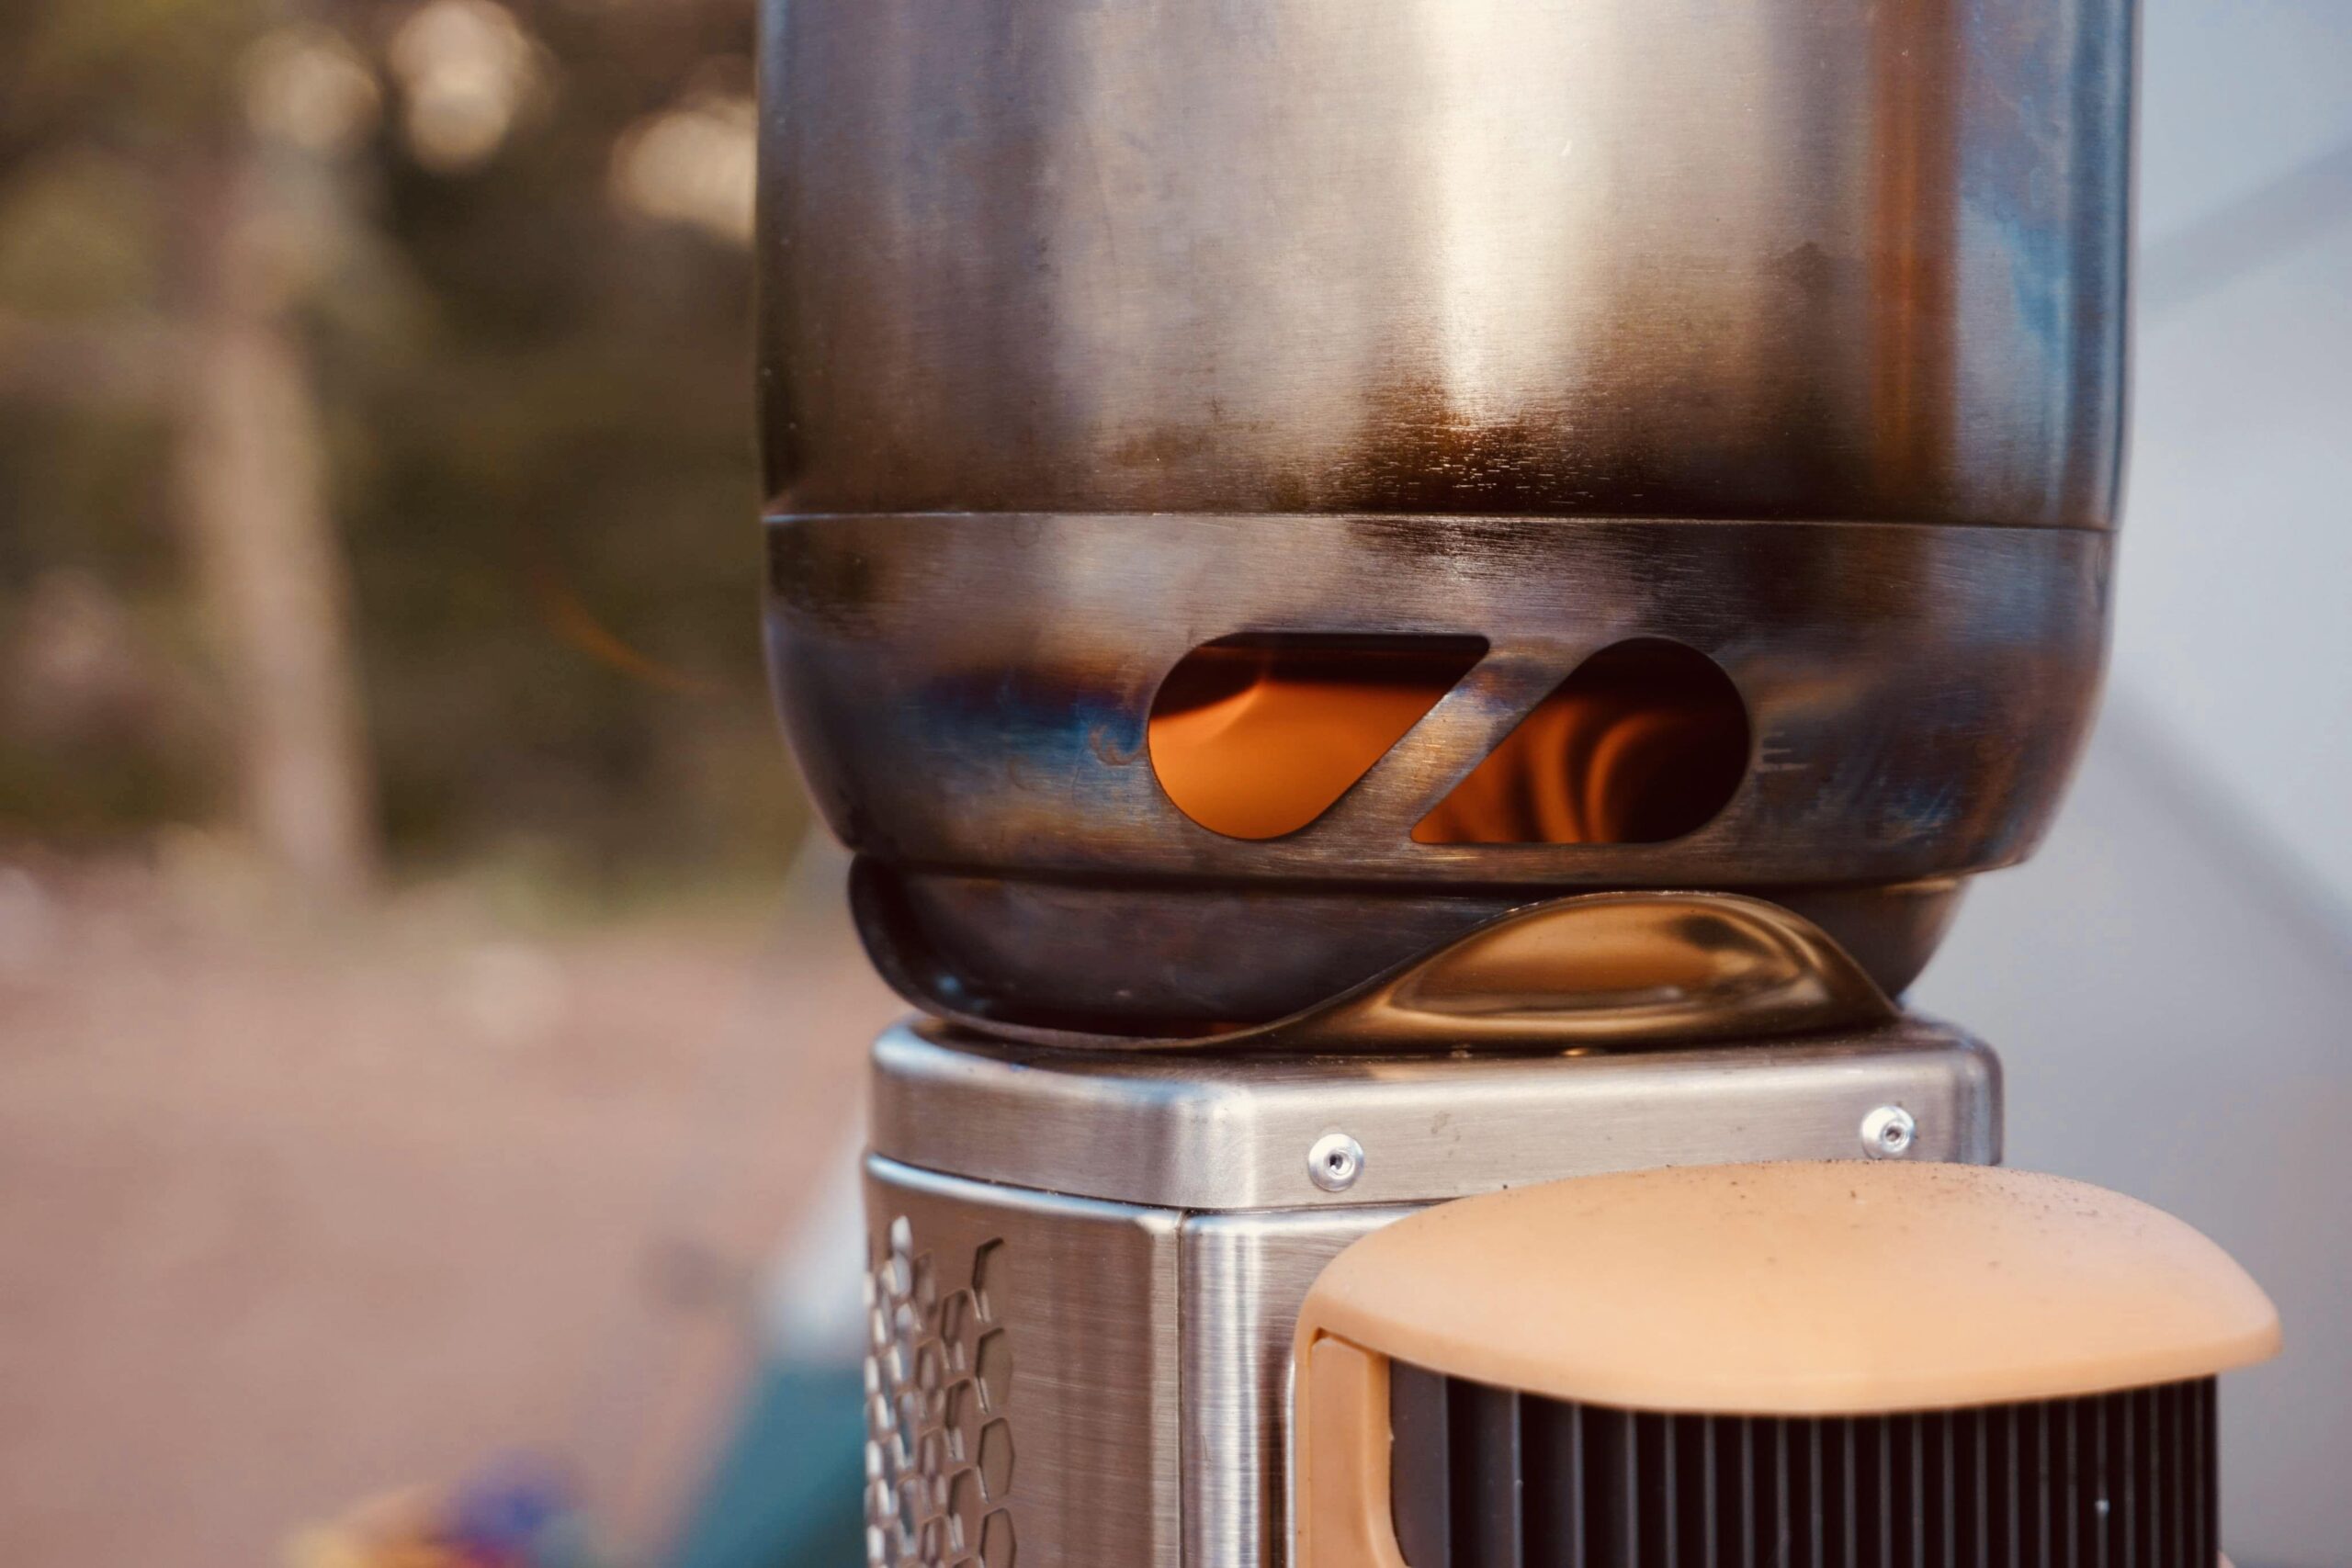 Why the BioLite Campstove Is the Best Camping Gadget